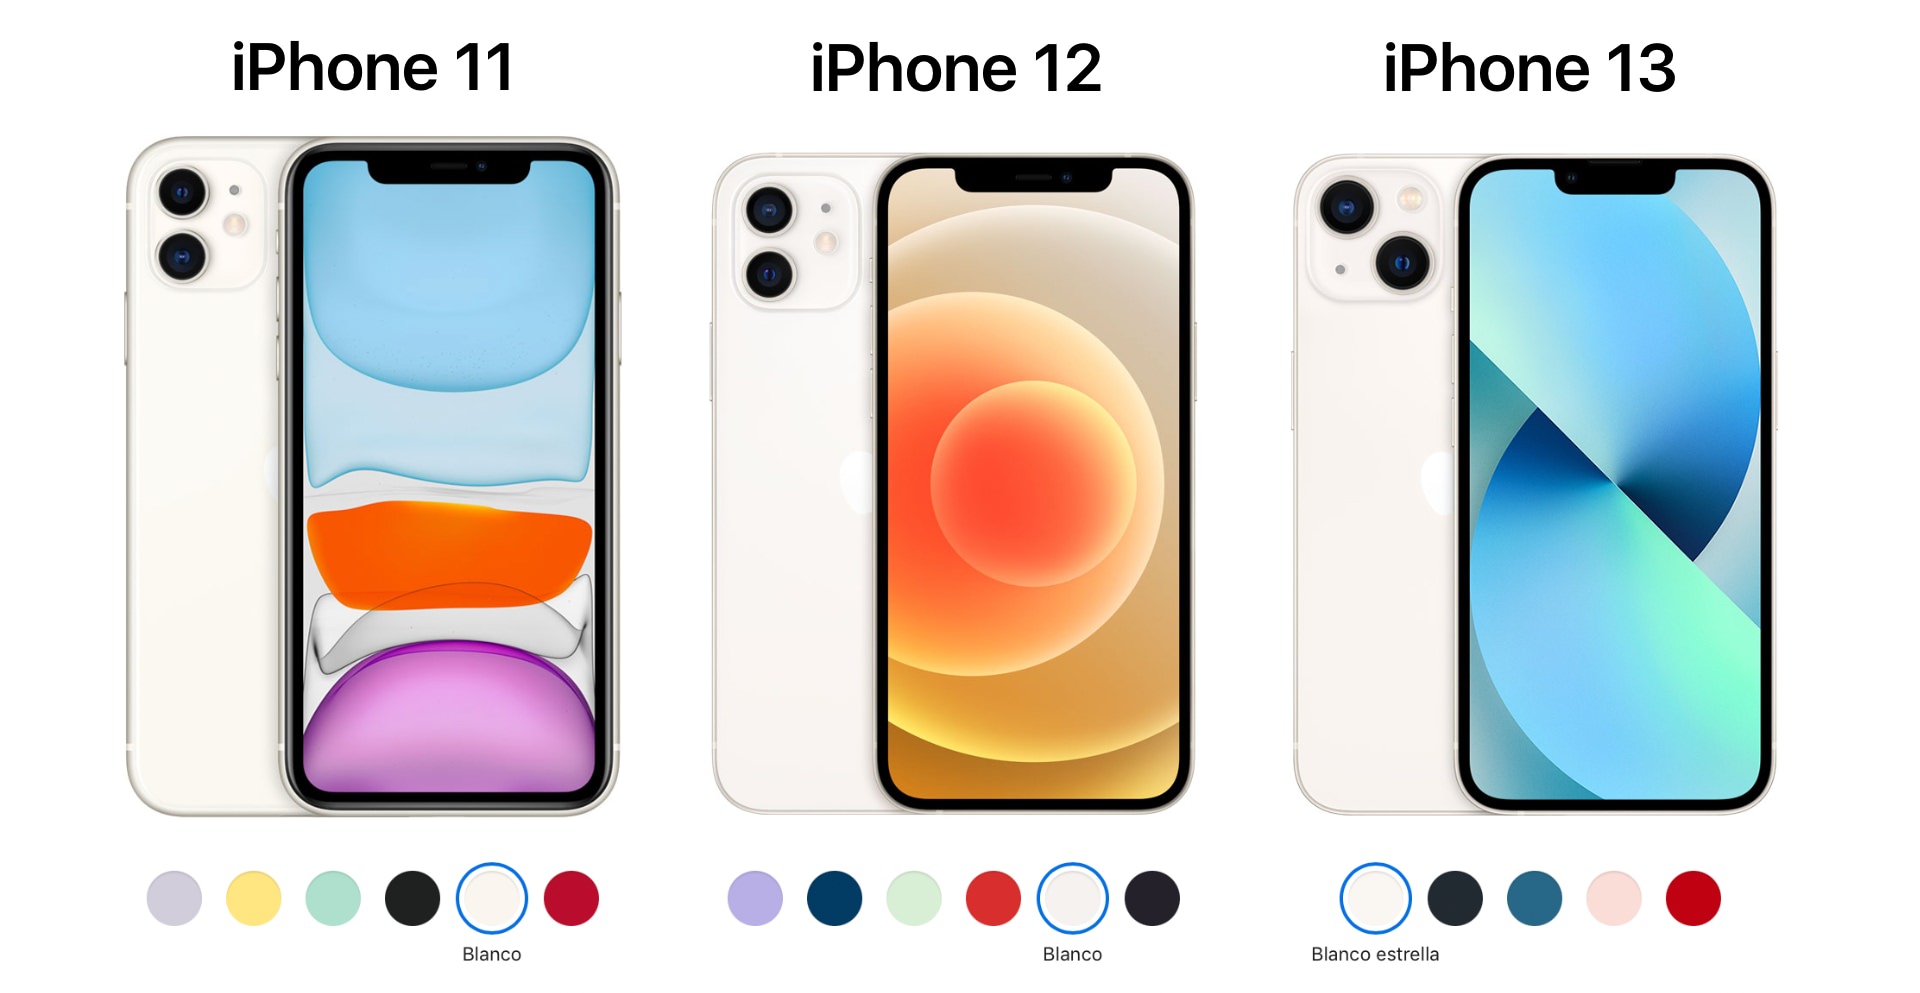 comparing-iphone-features-iphone-11-vs-iphone-12-vs-iphone-13